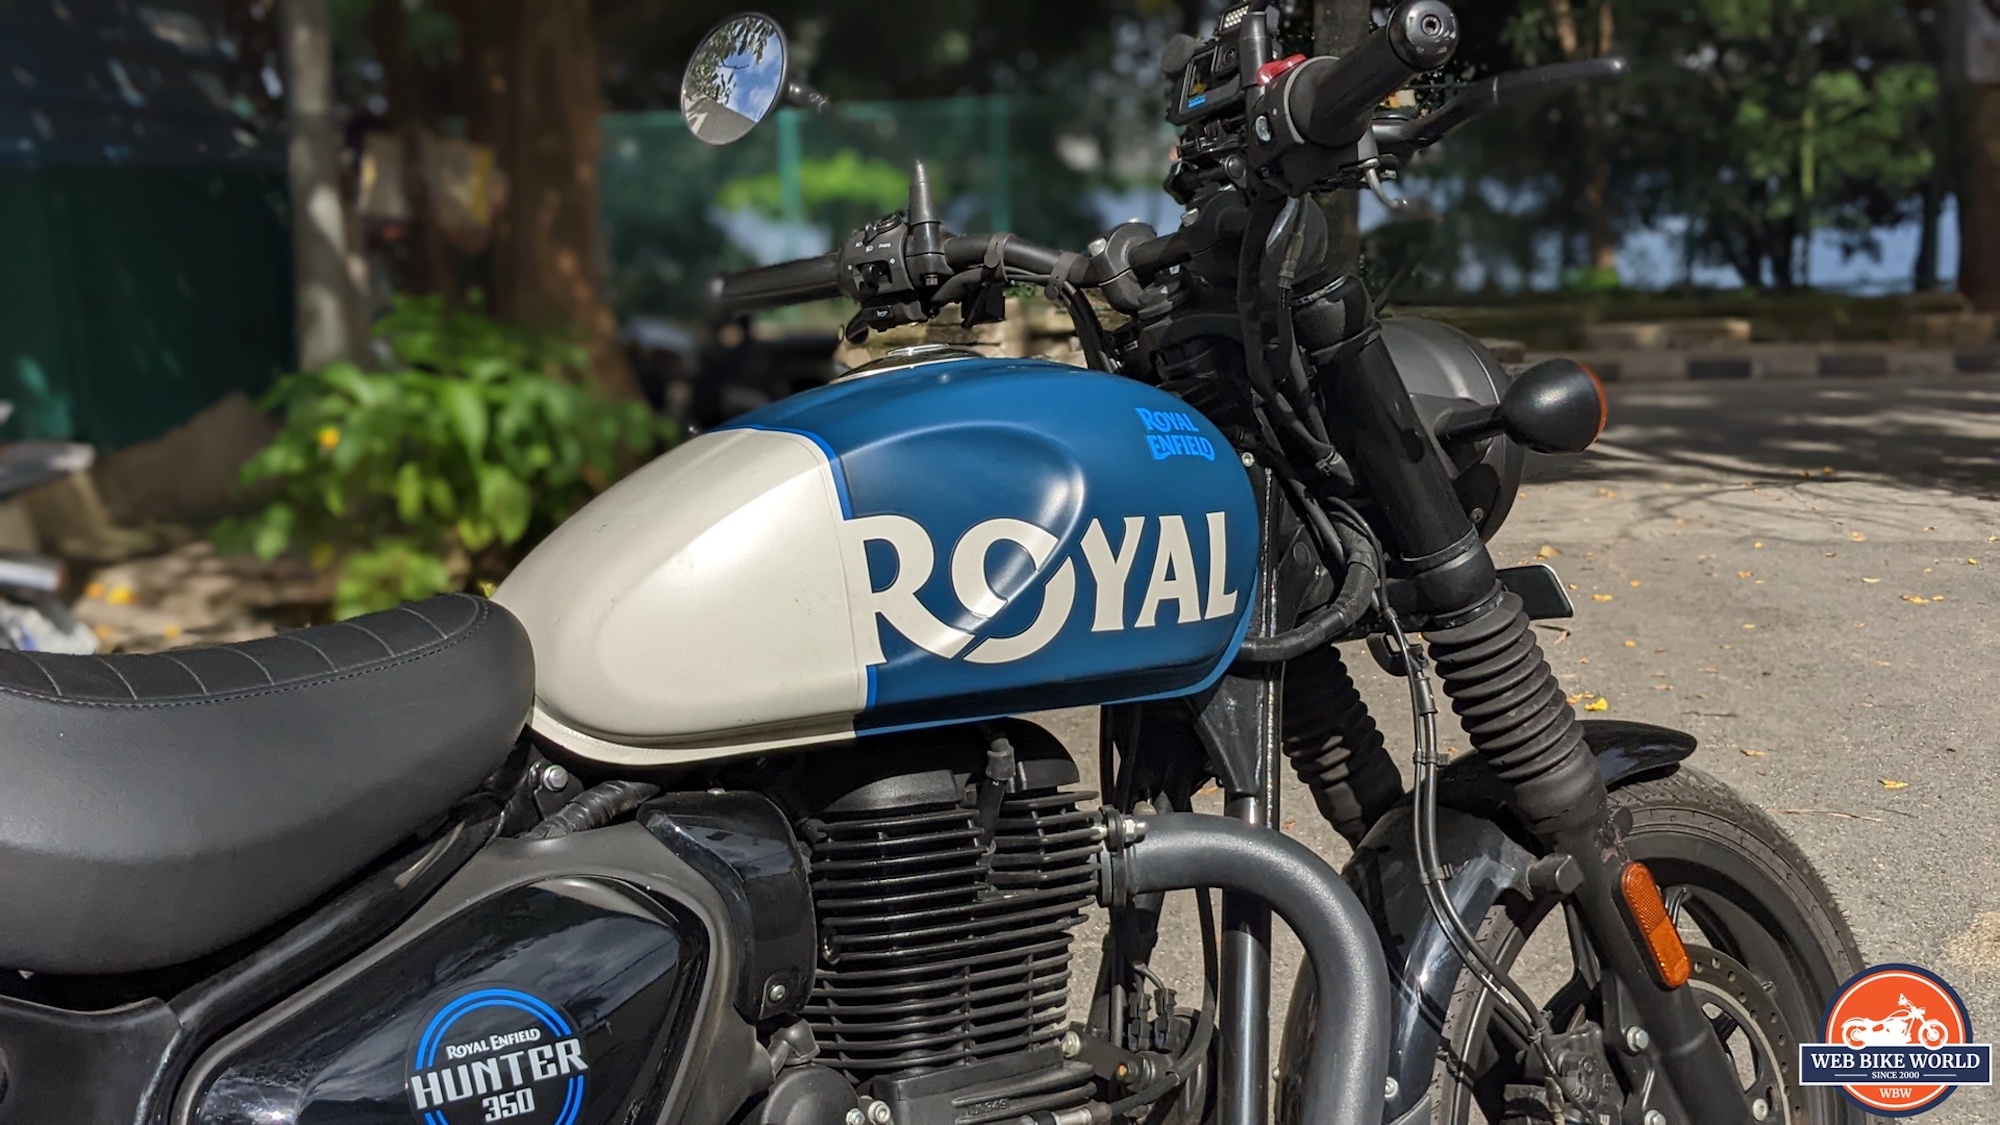 Royal Enfield's Hunter 350. Media sourced from  our own review on the Royal Enfield Hunter 350. All rights reserved.